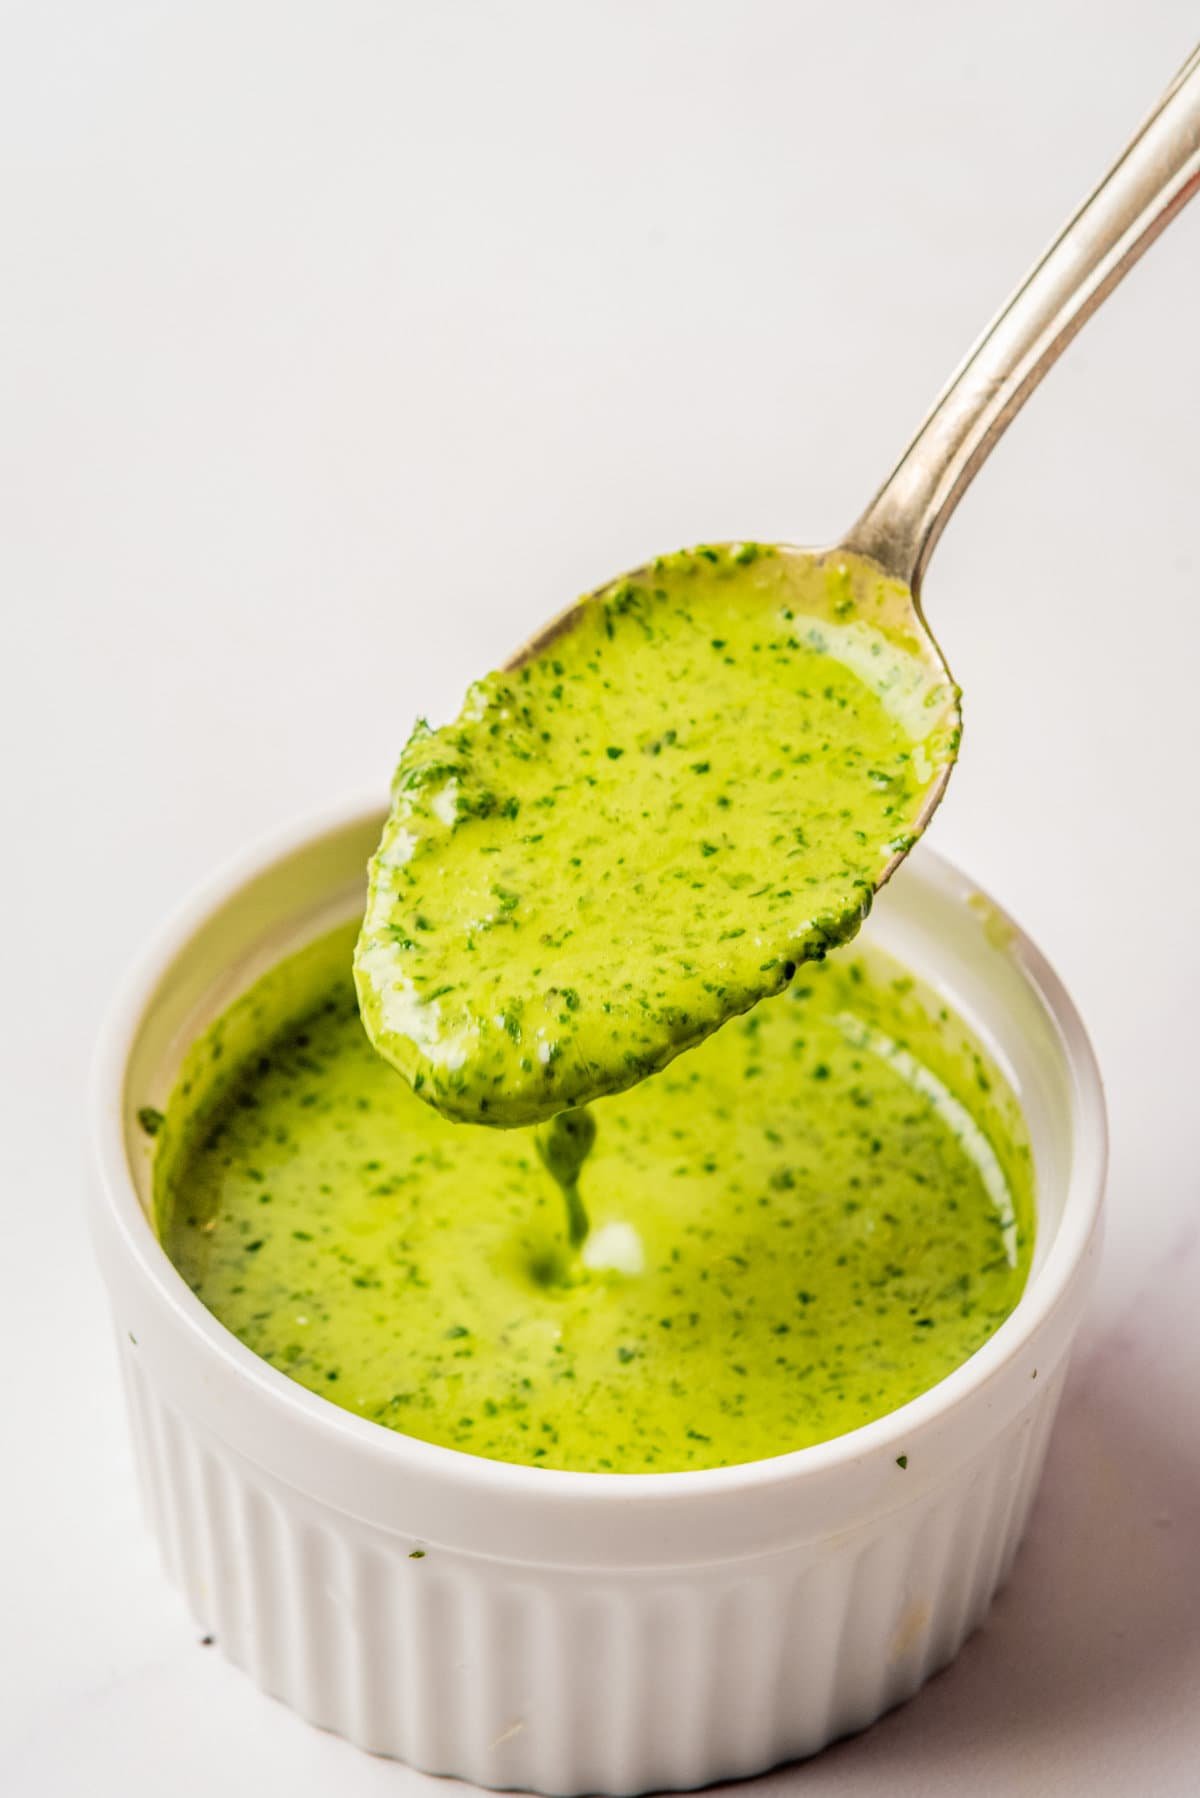 An image of a spoon scooping up a spoonful of cilantro lime dressing.